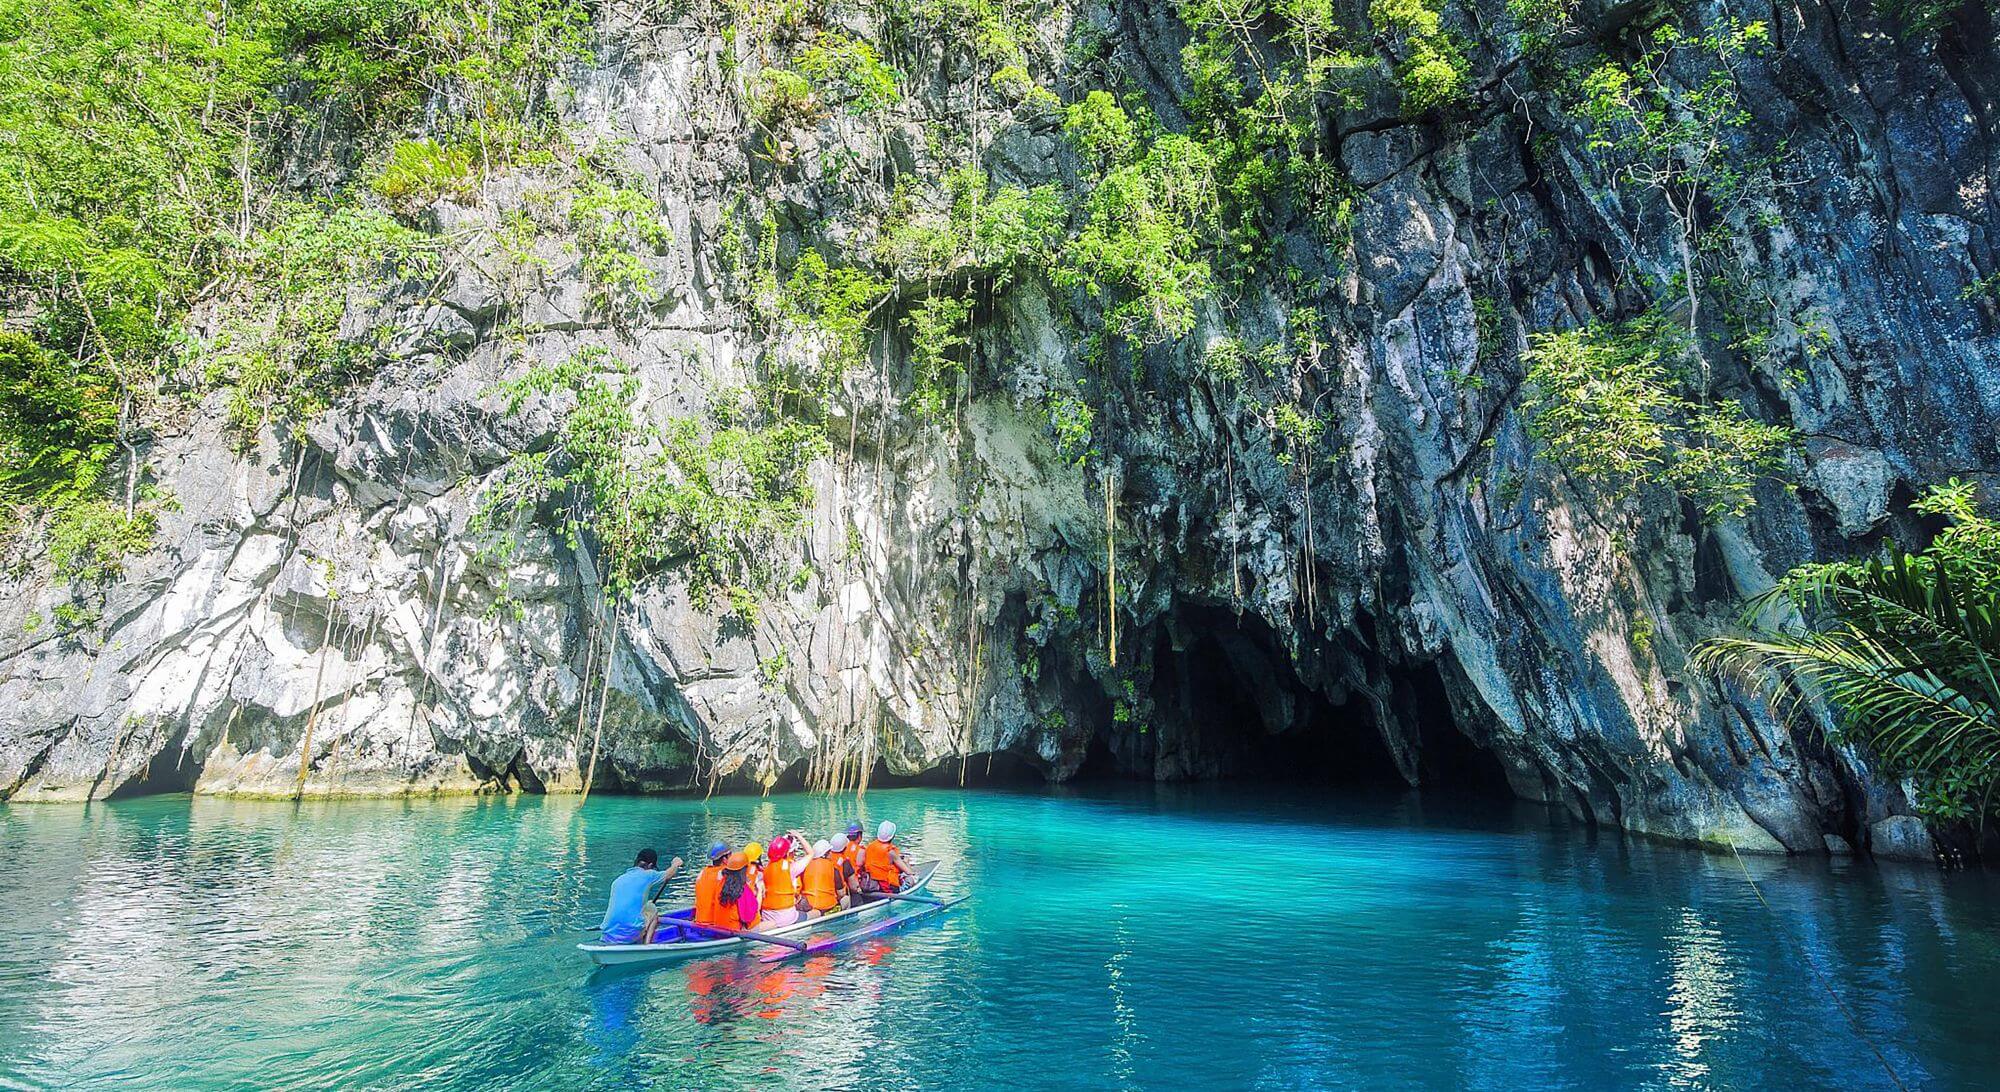 Tourists in a boat enetring a cave to explore an undeground river in Puerto Princesa in the Philippines